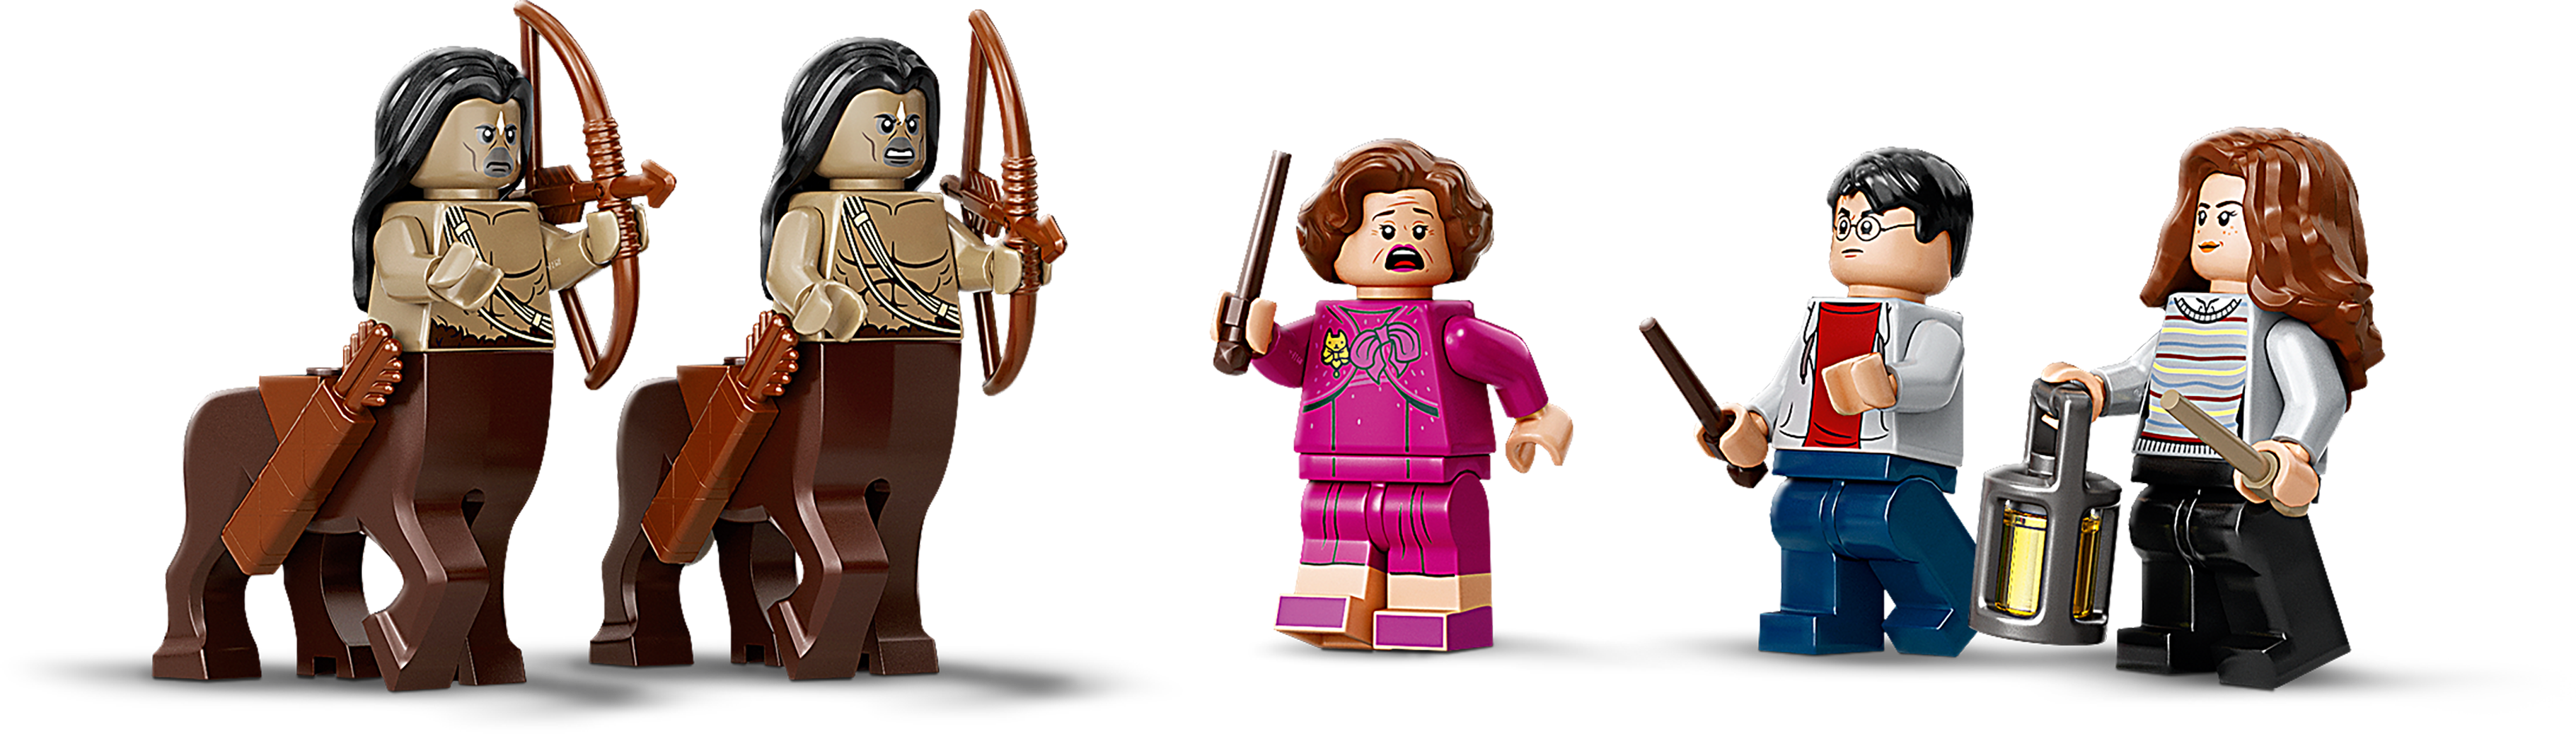 Bagged LEGO Harry Potter Delores Umbridge Minifigure from 75967 